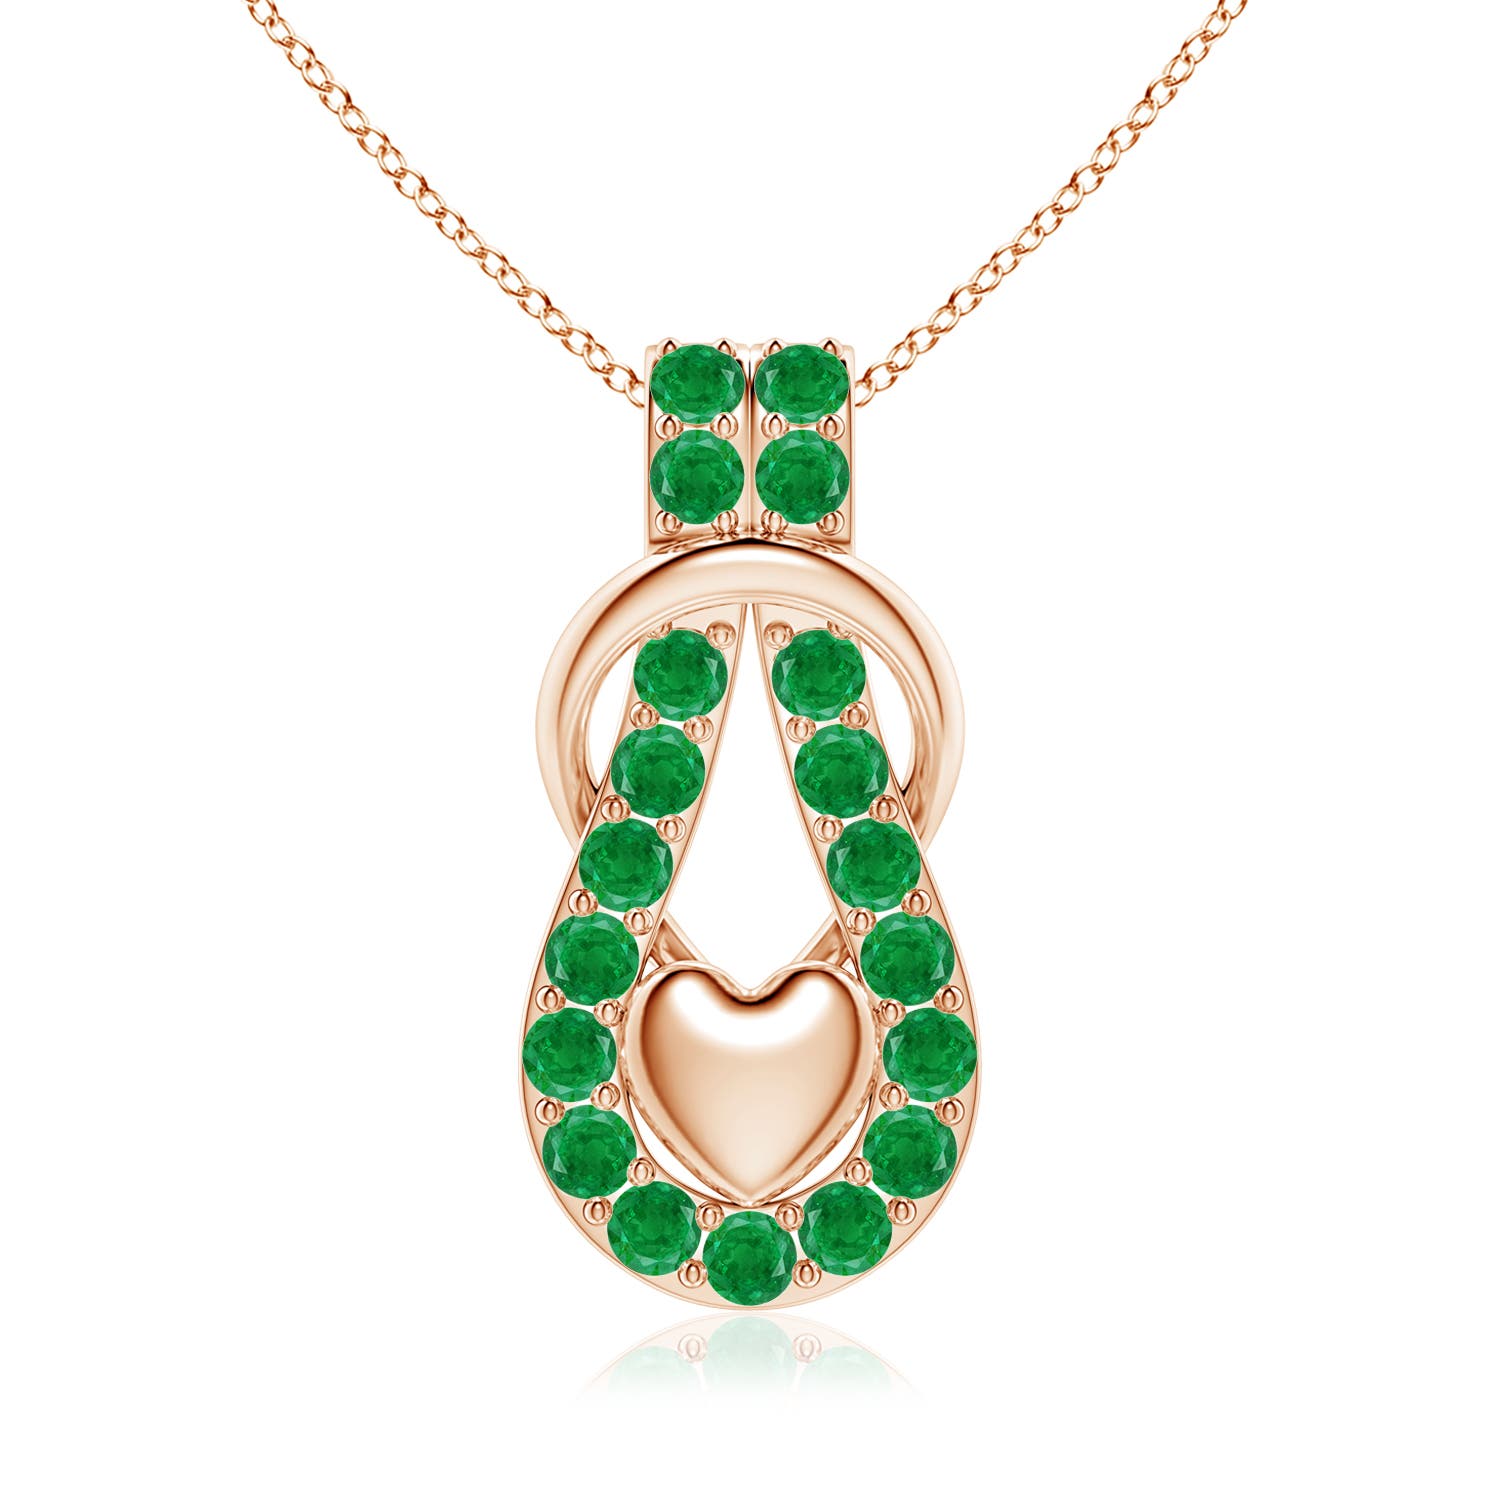 AA - Emerald / 2.85 CT / 14 KT Rose Gold